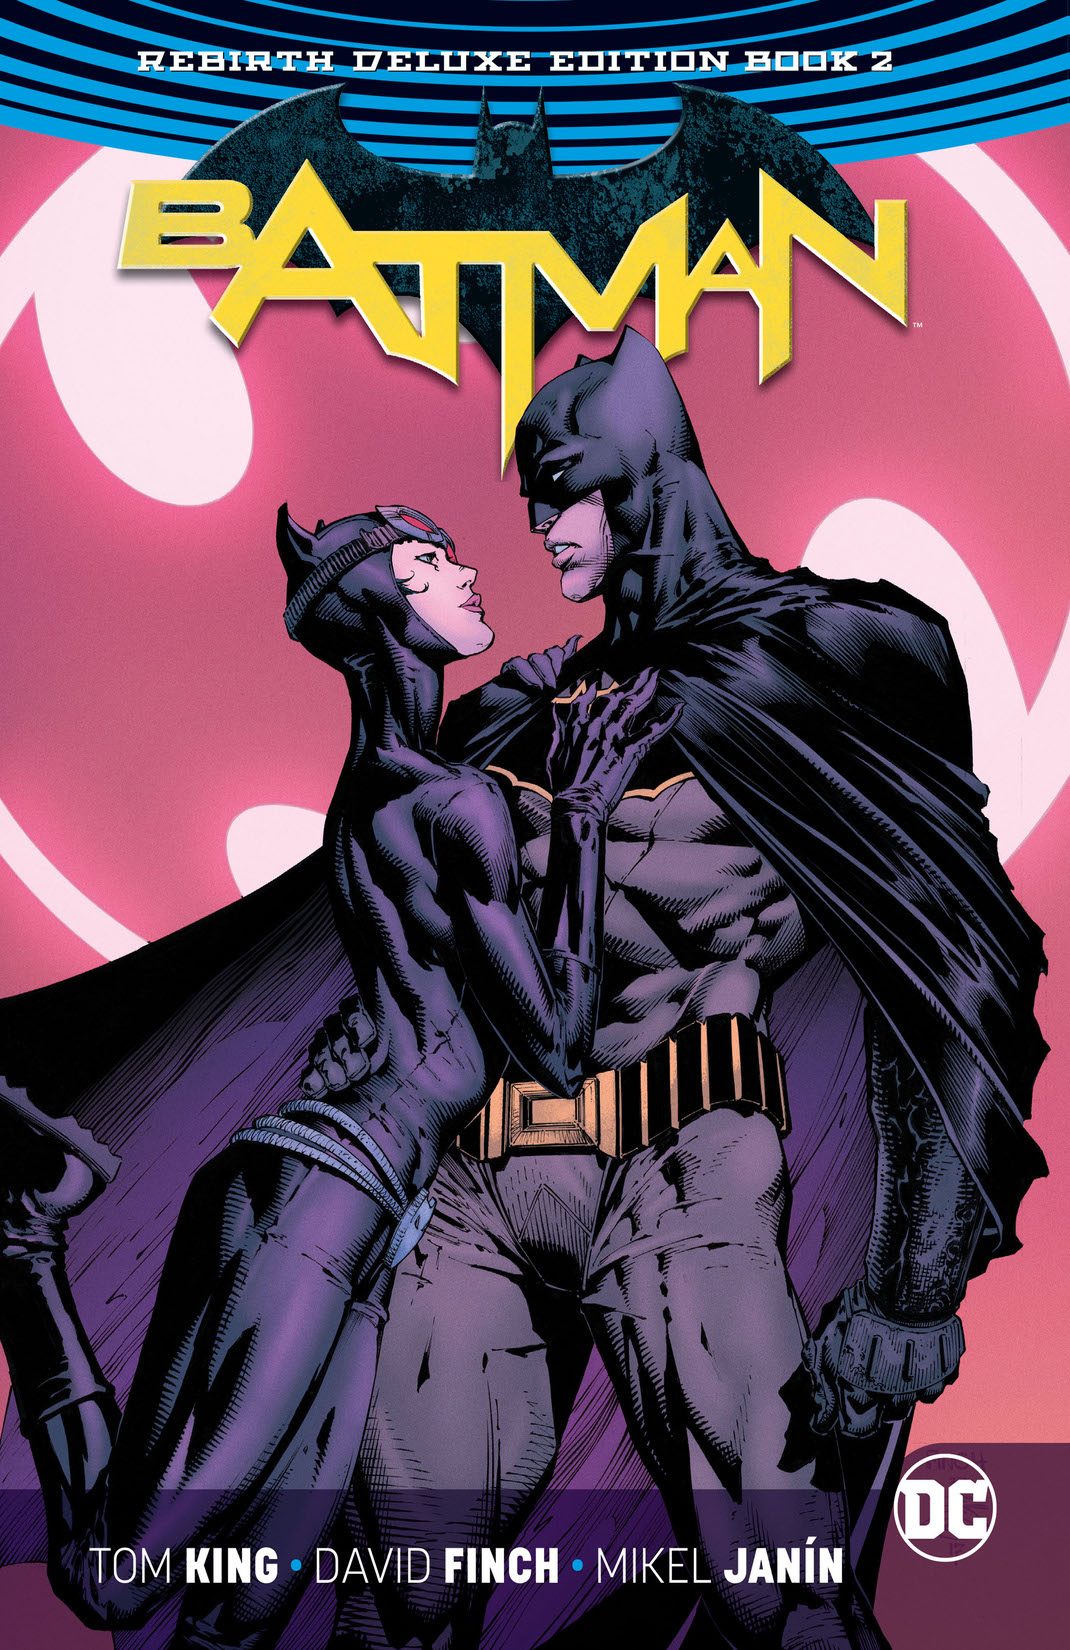 Batman: The Rebirth Deluxe Edition Book 2 preview images